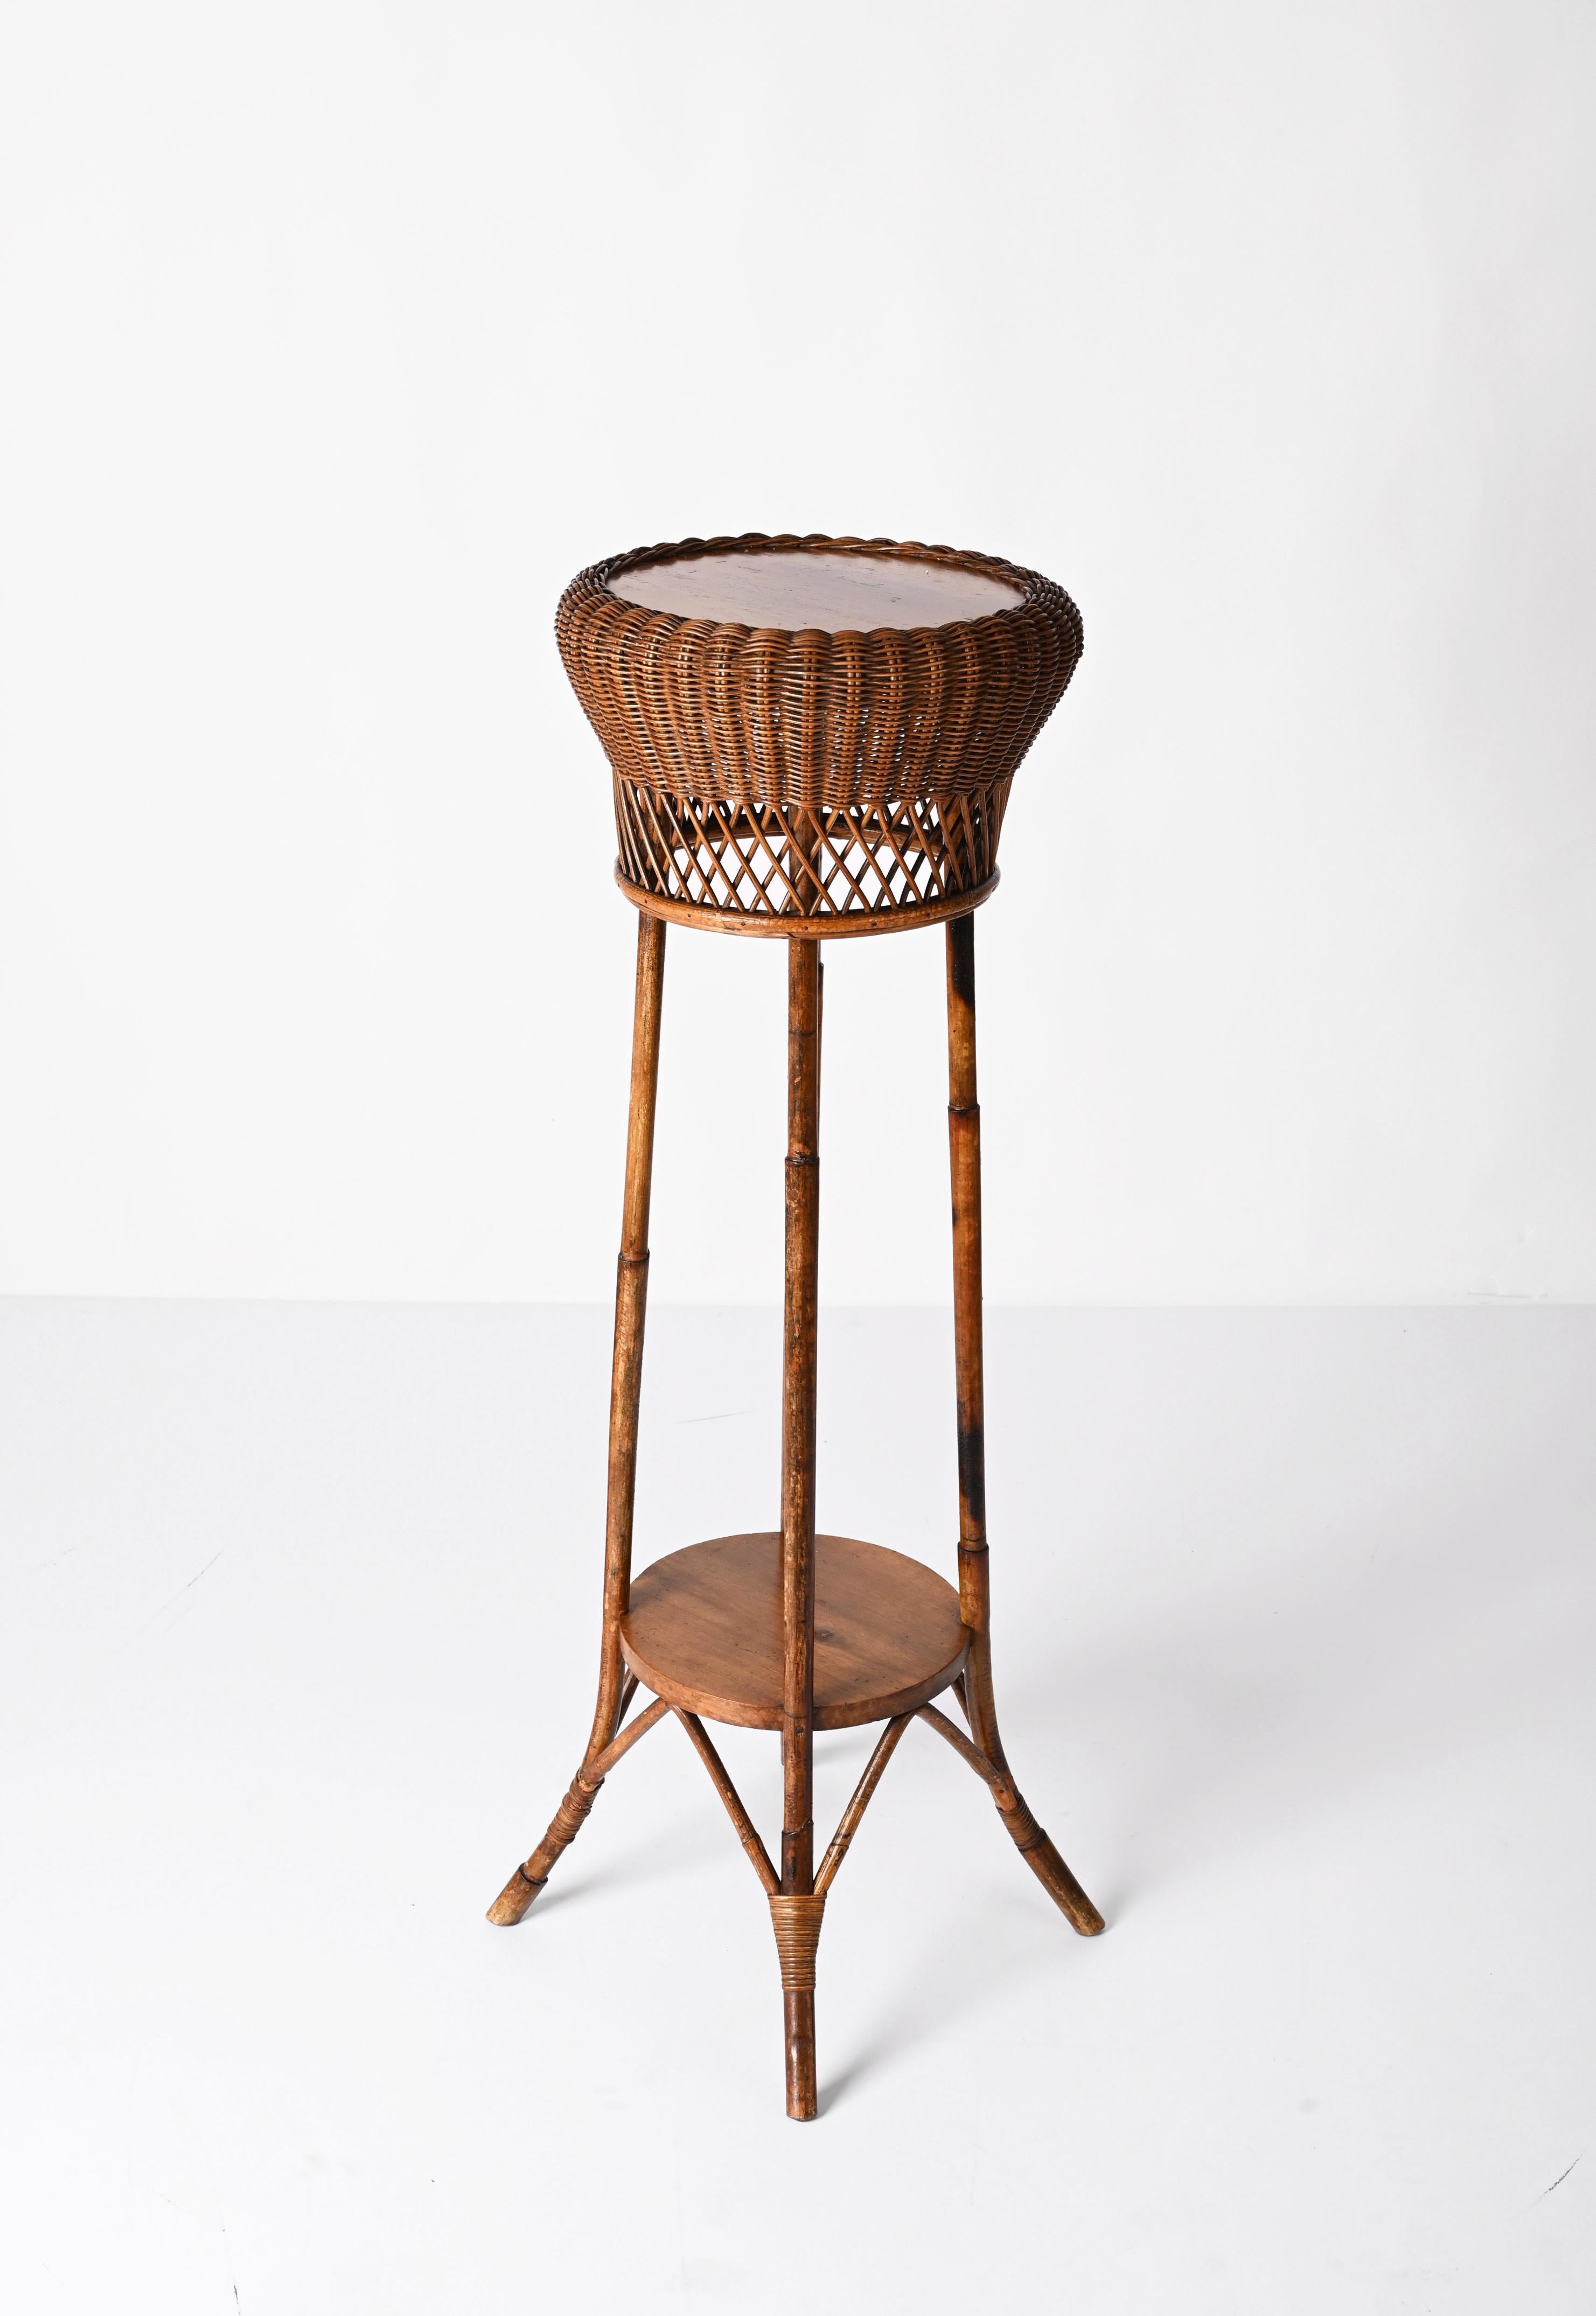 Midcentury Double-Levelled Circular Rattan and Bamboo Italian Pedestal, 1950s For Sale 5